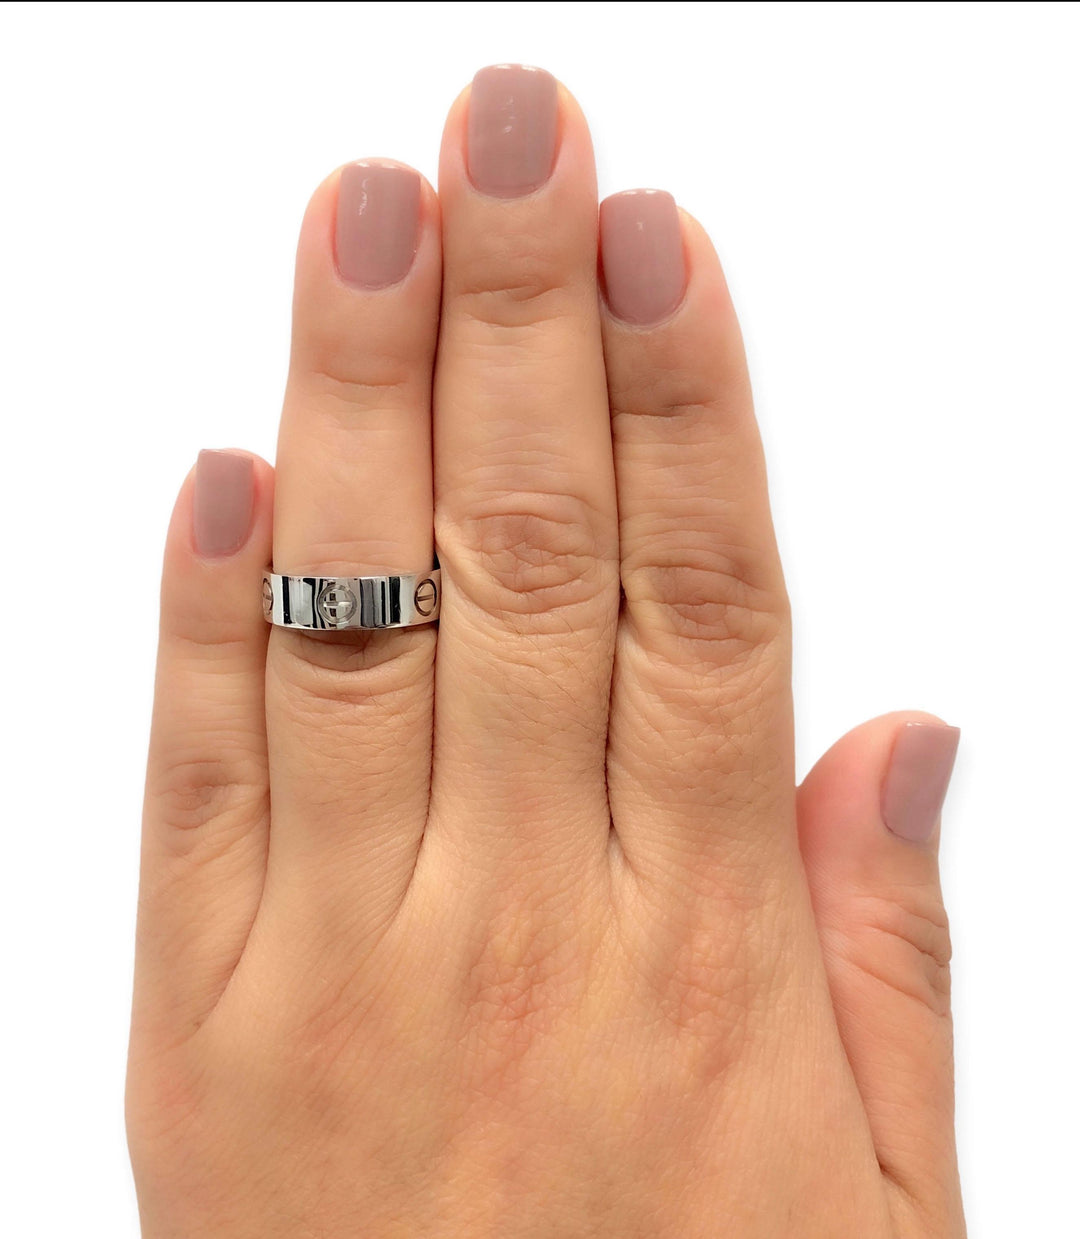 Cartier Love Ring in 18K White Gold 5.5mm Size 54 (US6.75)